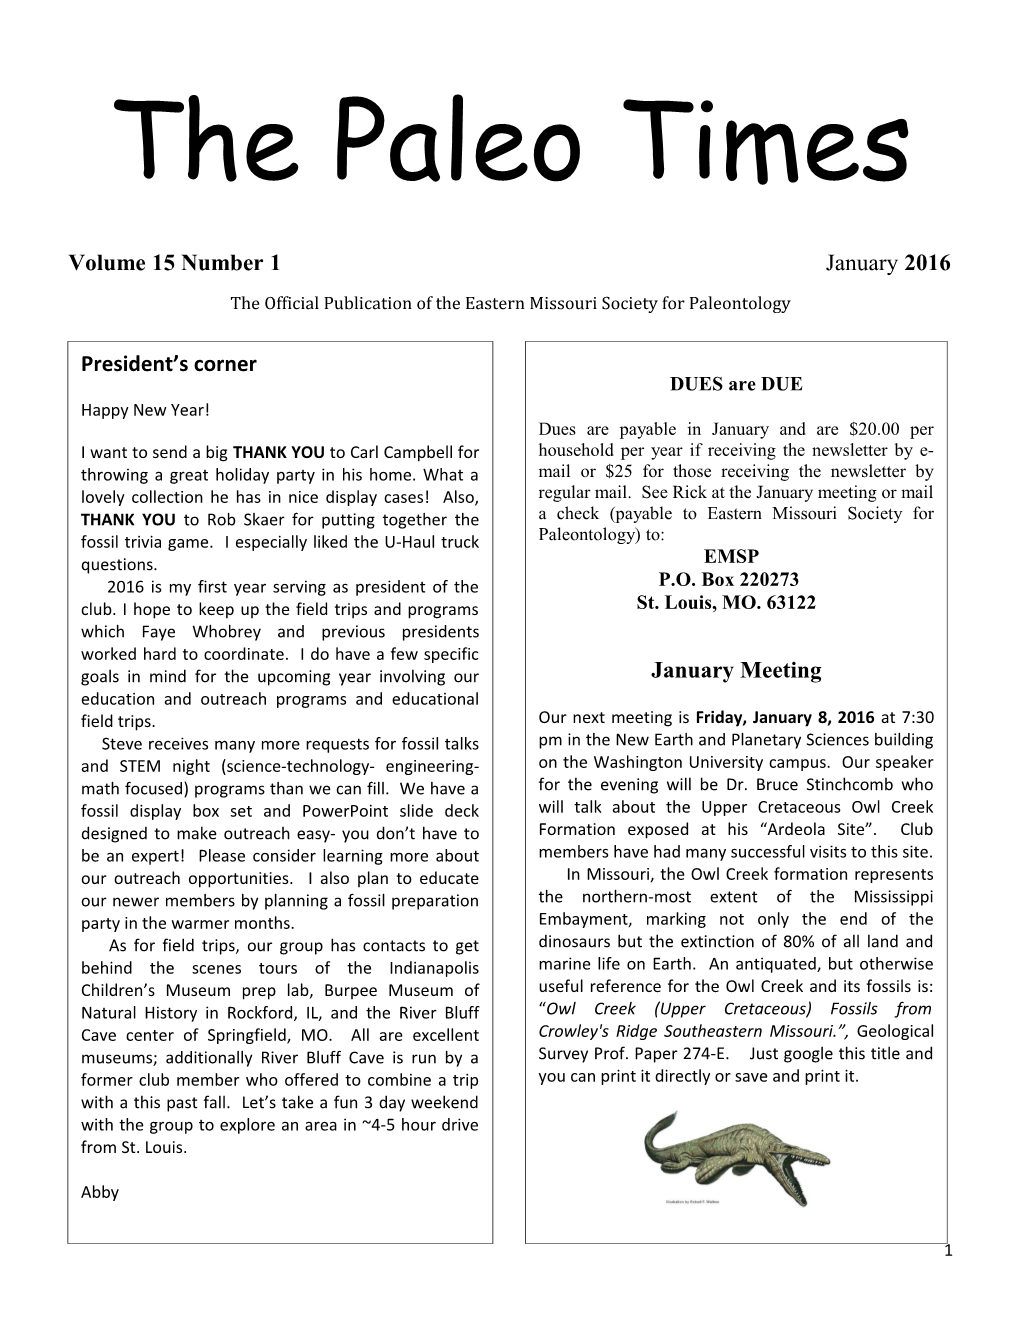 The Official Publication of the Eastern Missouri Society for Paleontology